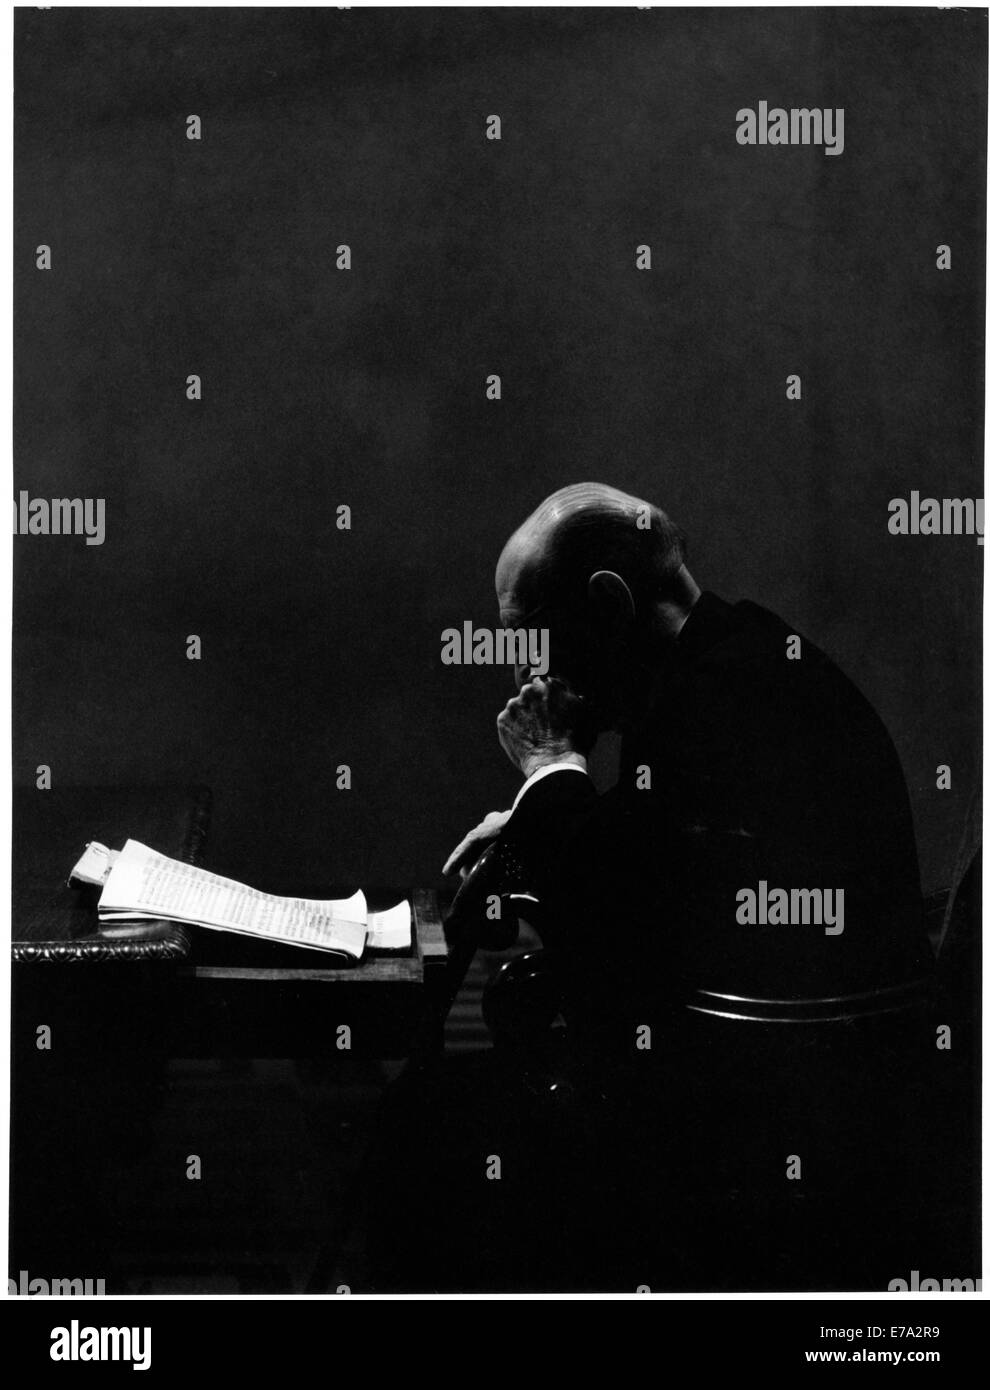 Igor Stravinsky (1882-1971), Russian Composer, Pianist and Conductor Moody Profile, 1965 Stock Photo